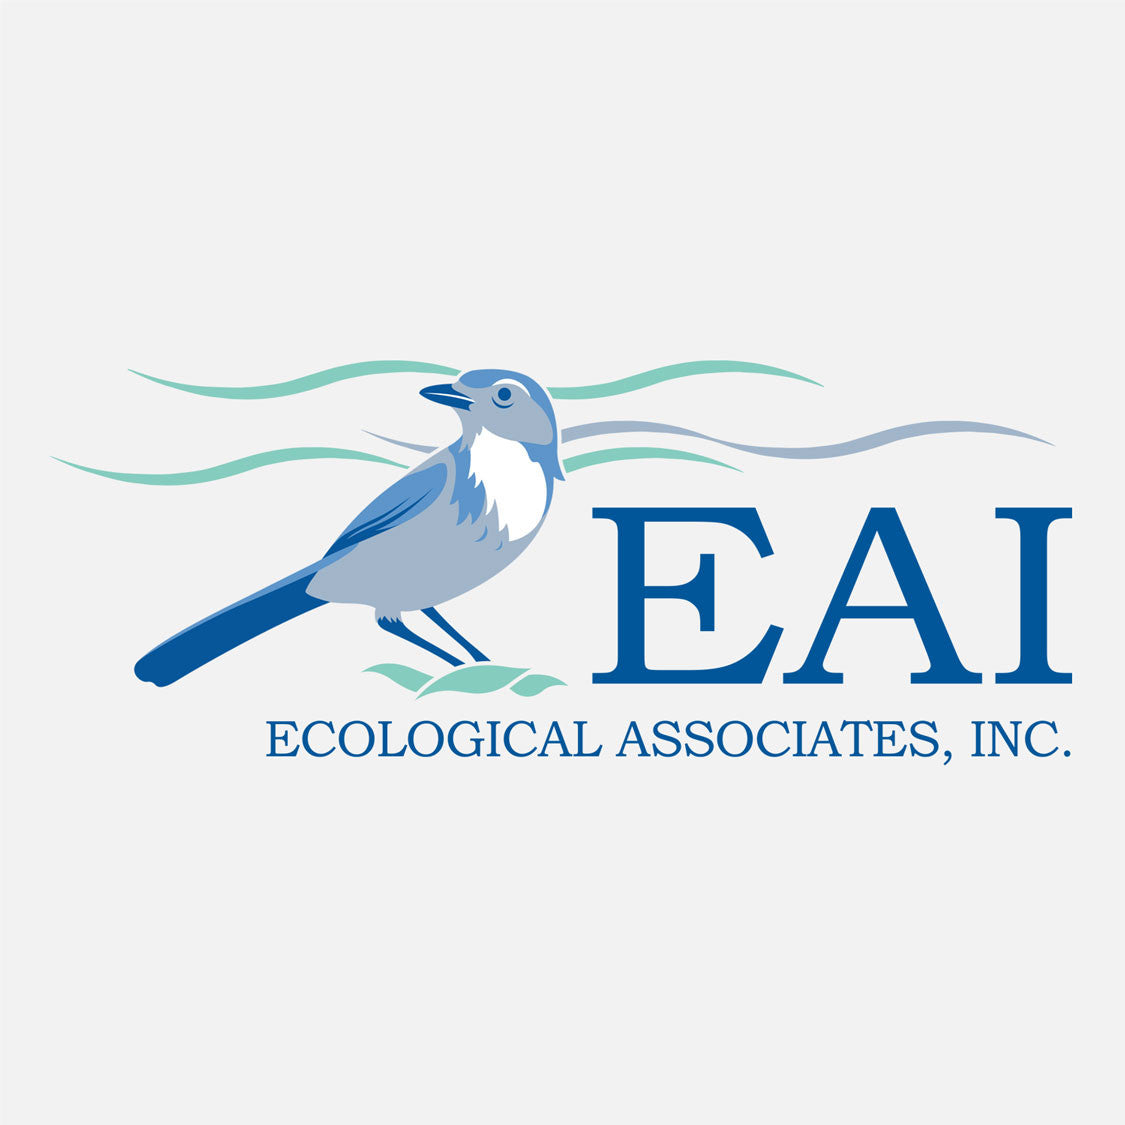 EAI provides environmental monitoring, permitting and consultation services. The logo is a graphic of a Florida scrub jay.